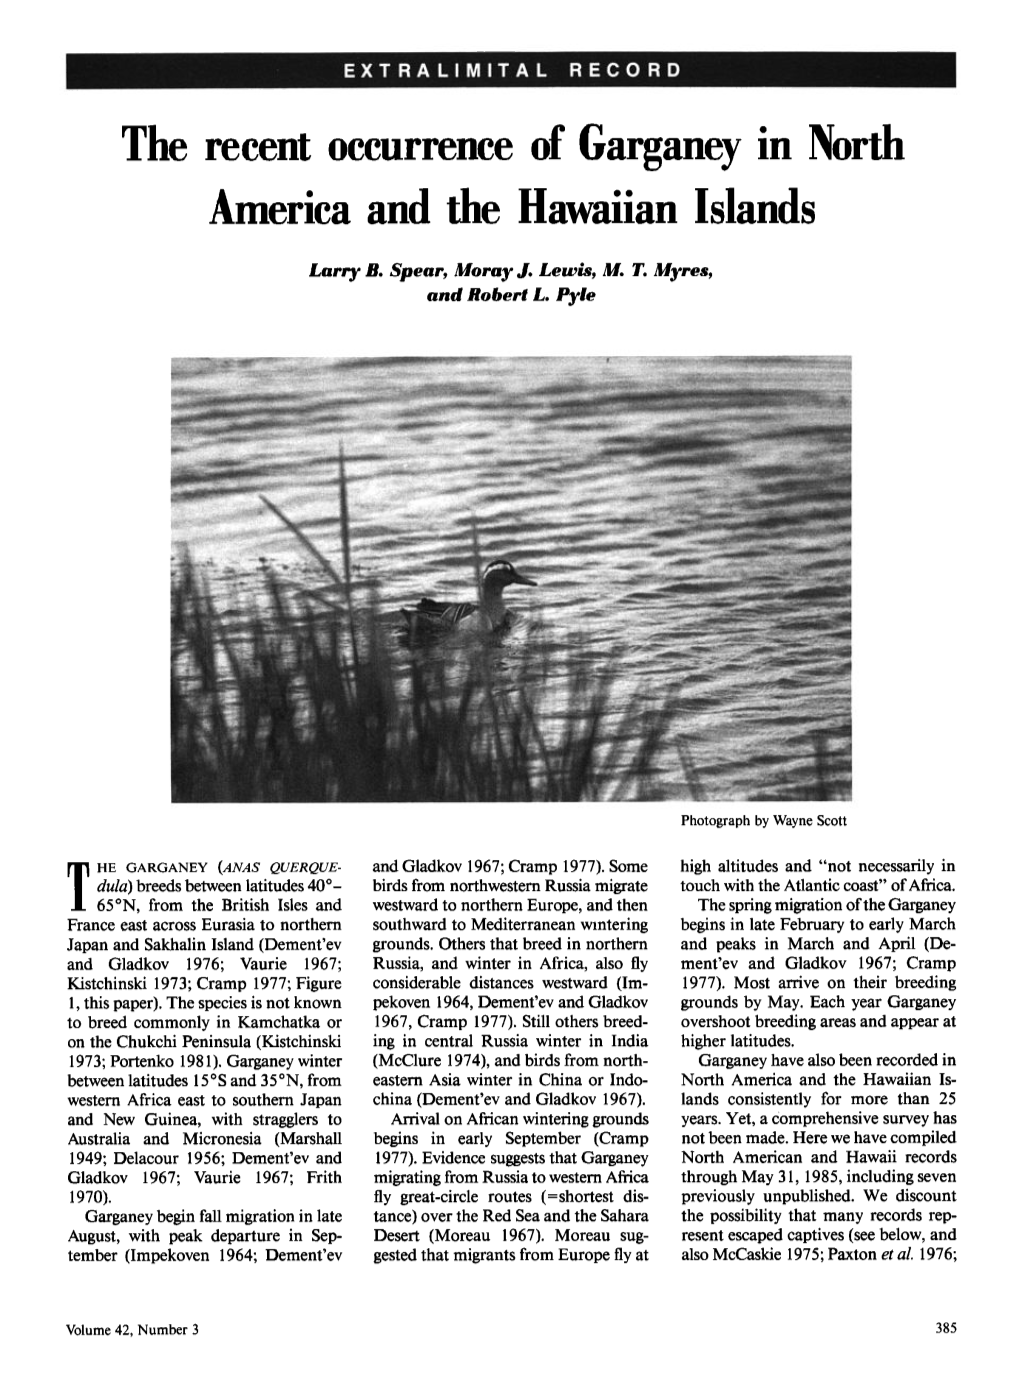 The Recent Occurrence of Garganey in North America and the Hawaiian